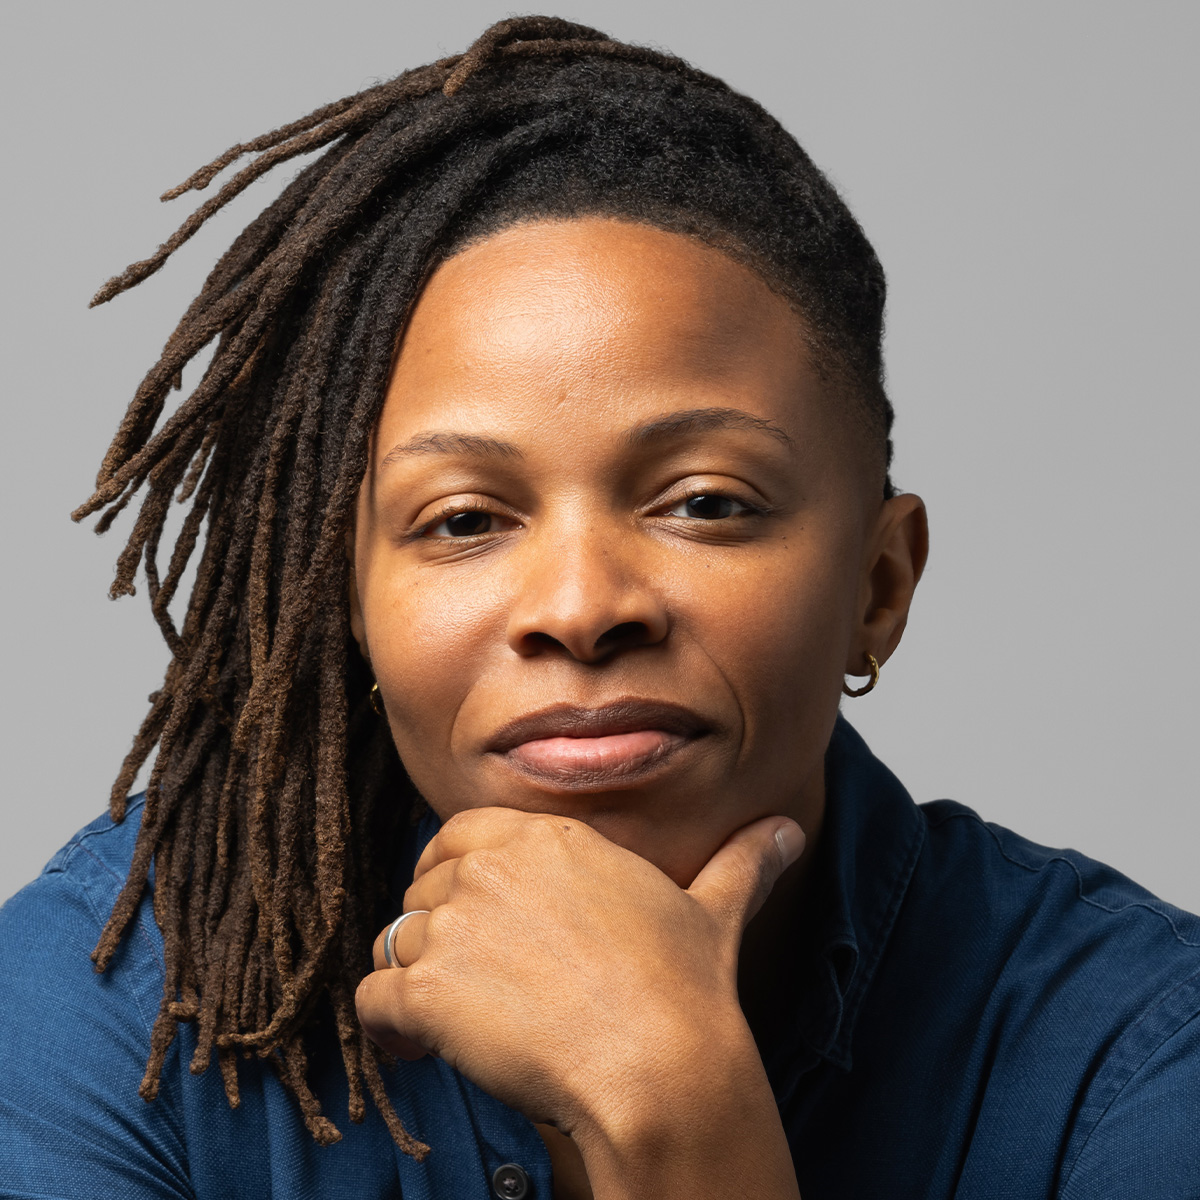 Prentis Hemphill color portrait. Prentis is a Black person with medium-length locs. Their hand is resting on heir chin and they are smiling as they are posed in front of a gray background. They are wearing a blue button-down, and one small hoop can be seen.